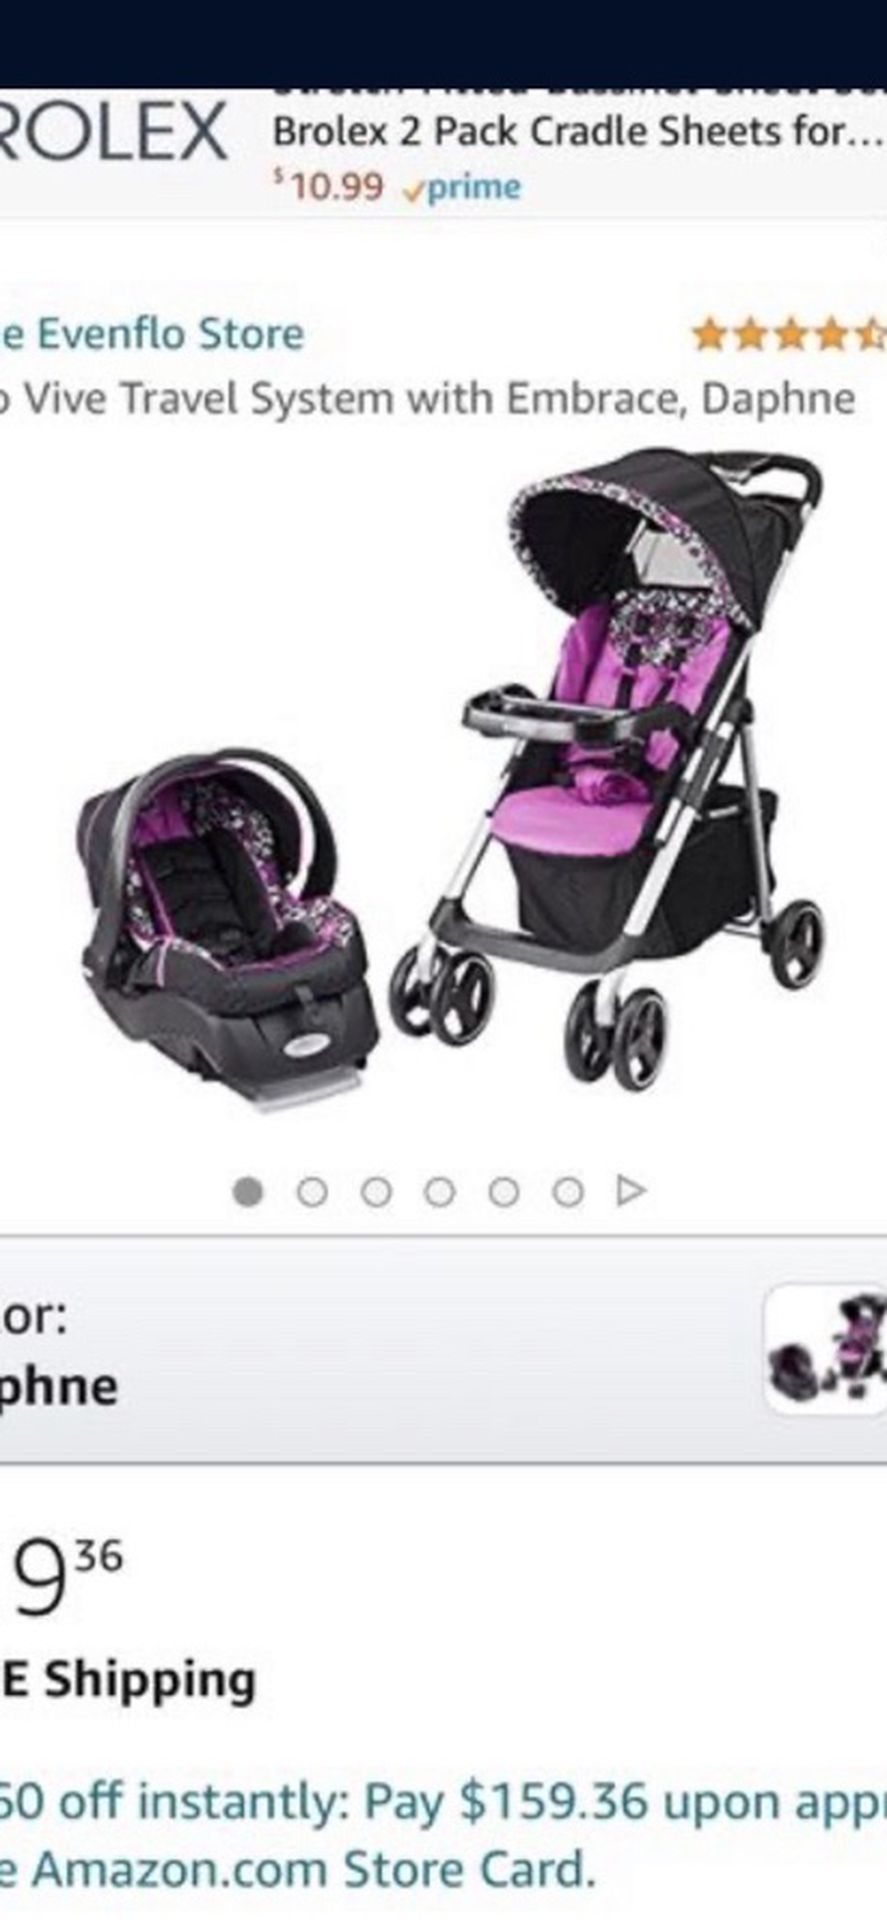 Unused Car Seat And Stroller